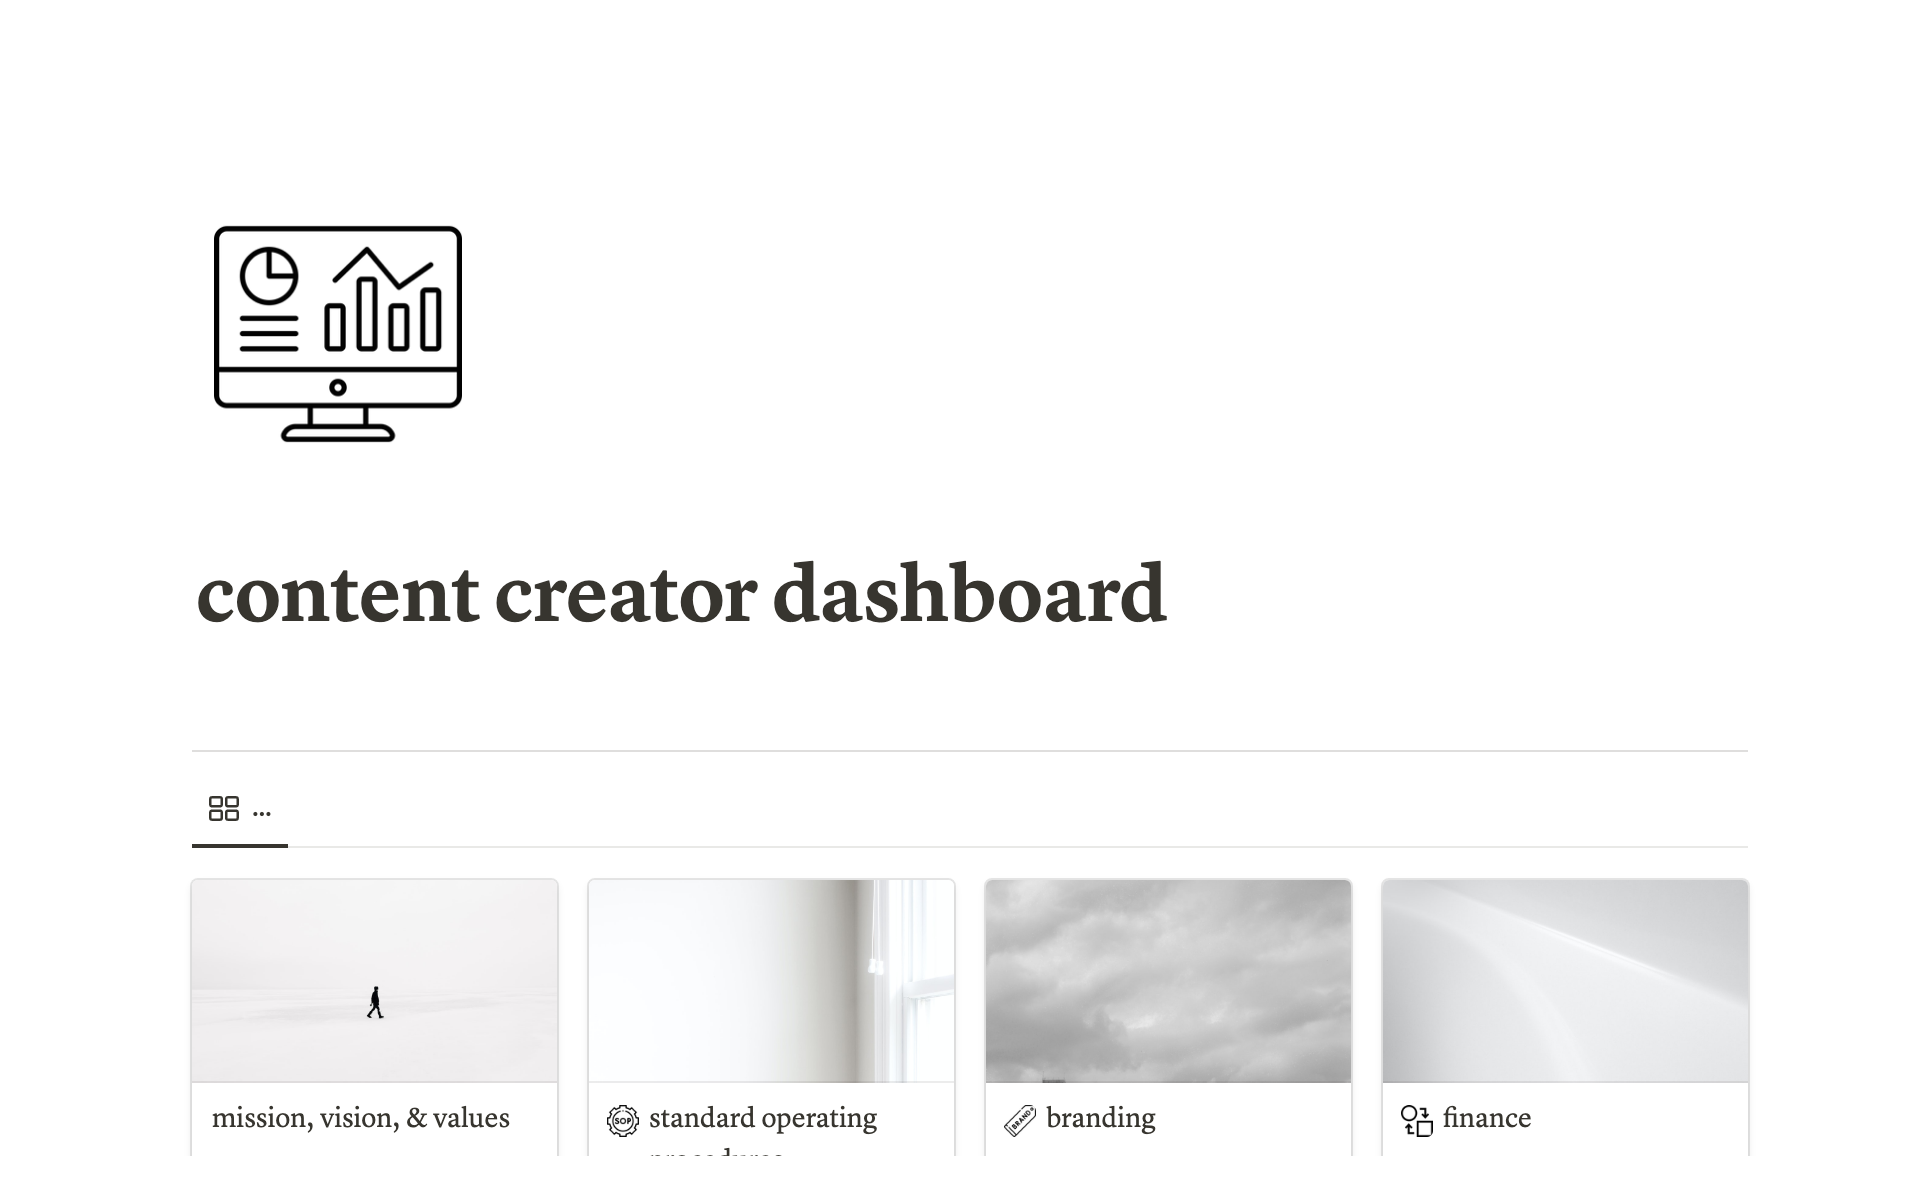 A template preview for Content Creation Dashboard